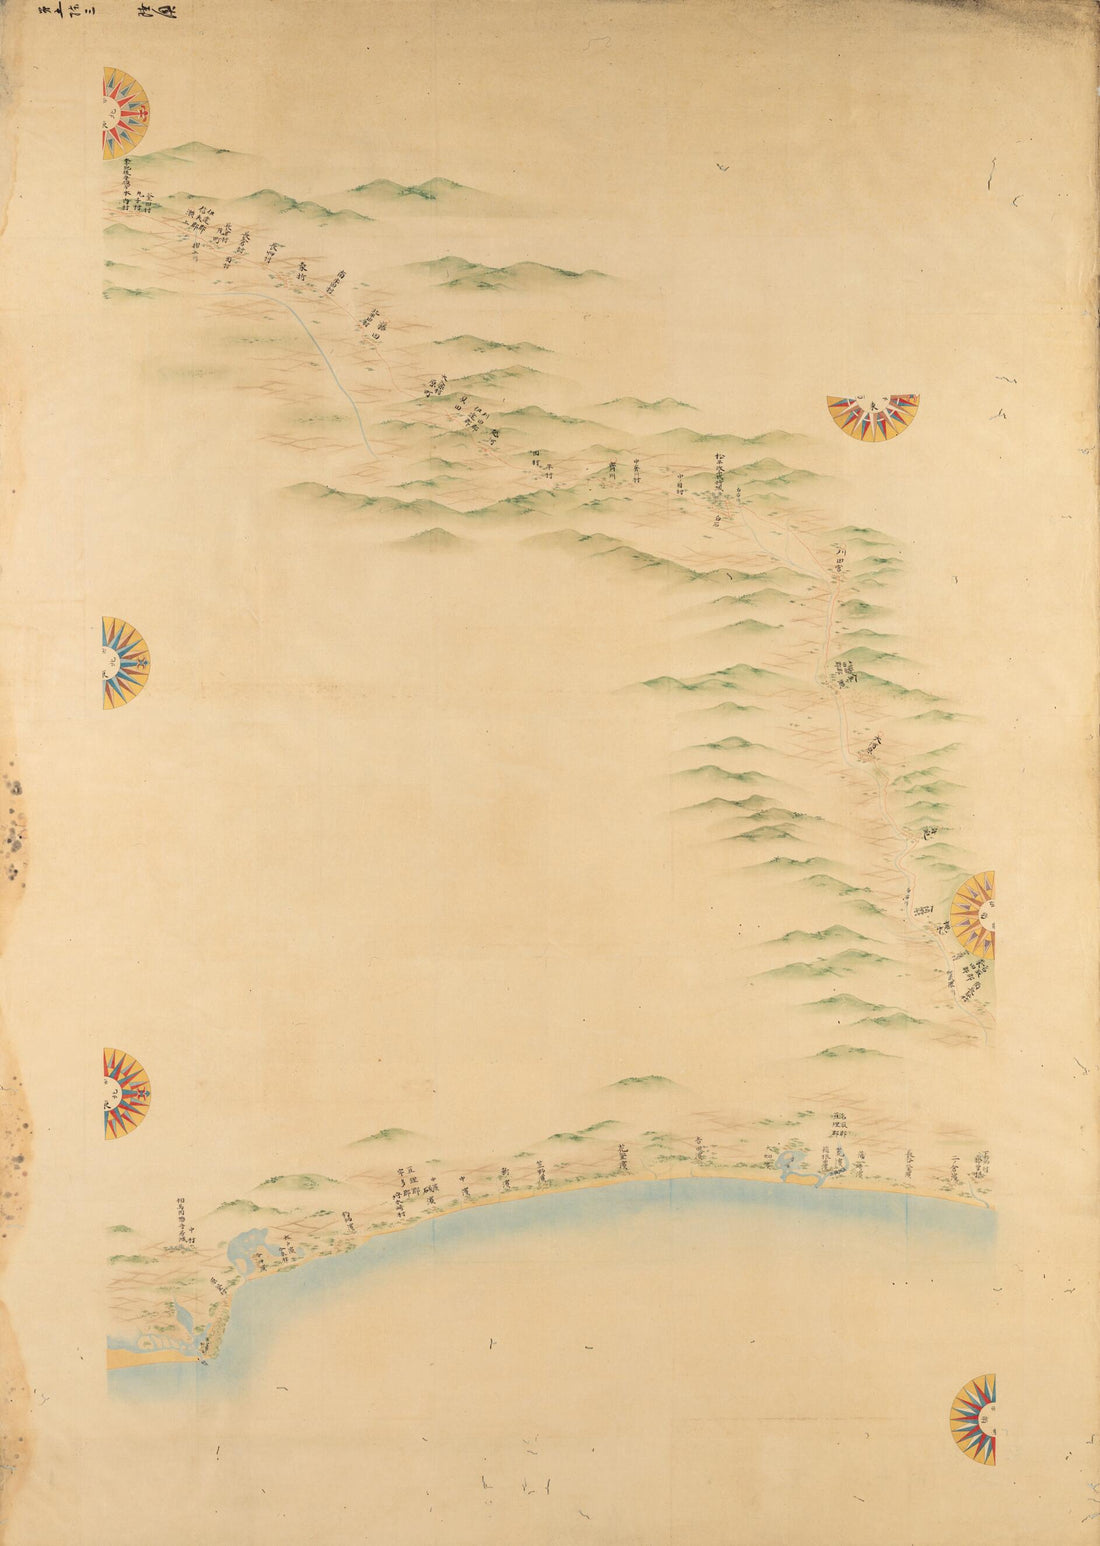 This old map of Maps of the Japanese Coastal Areas (Ino Maps) from 1873 was created by Tadataka Inō in 1873